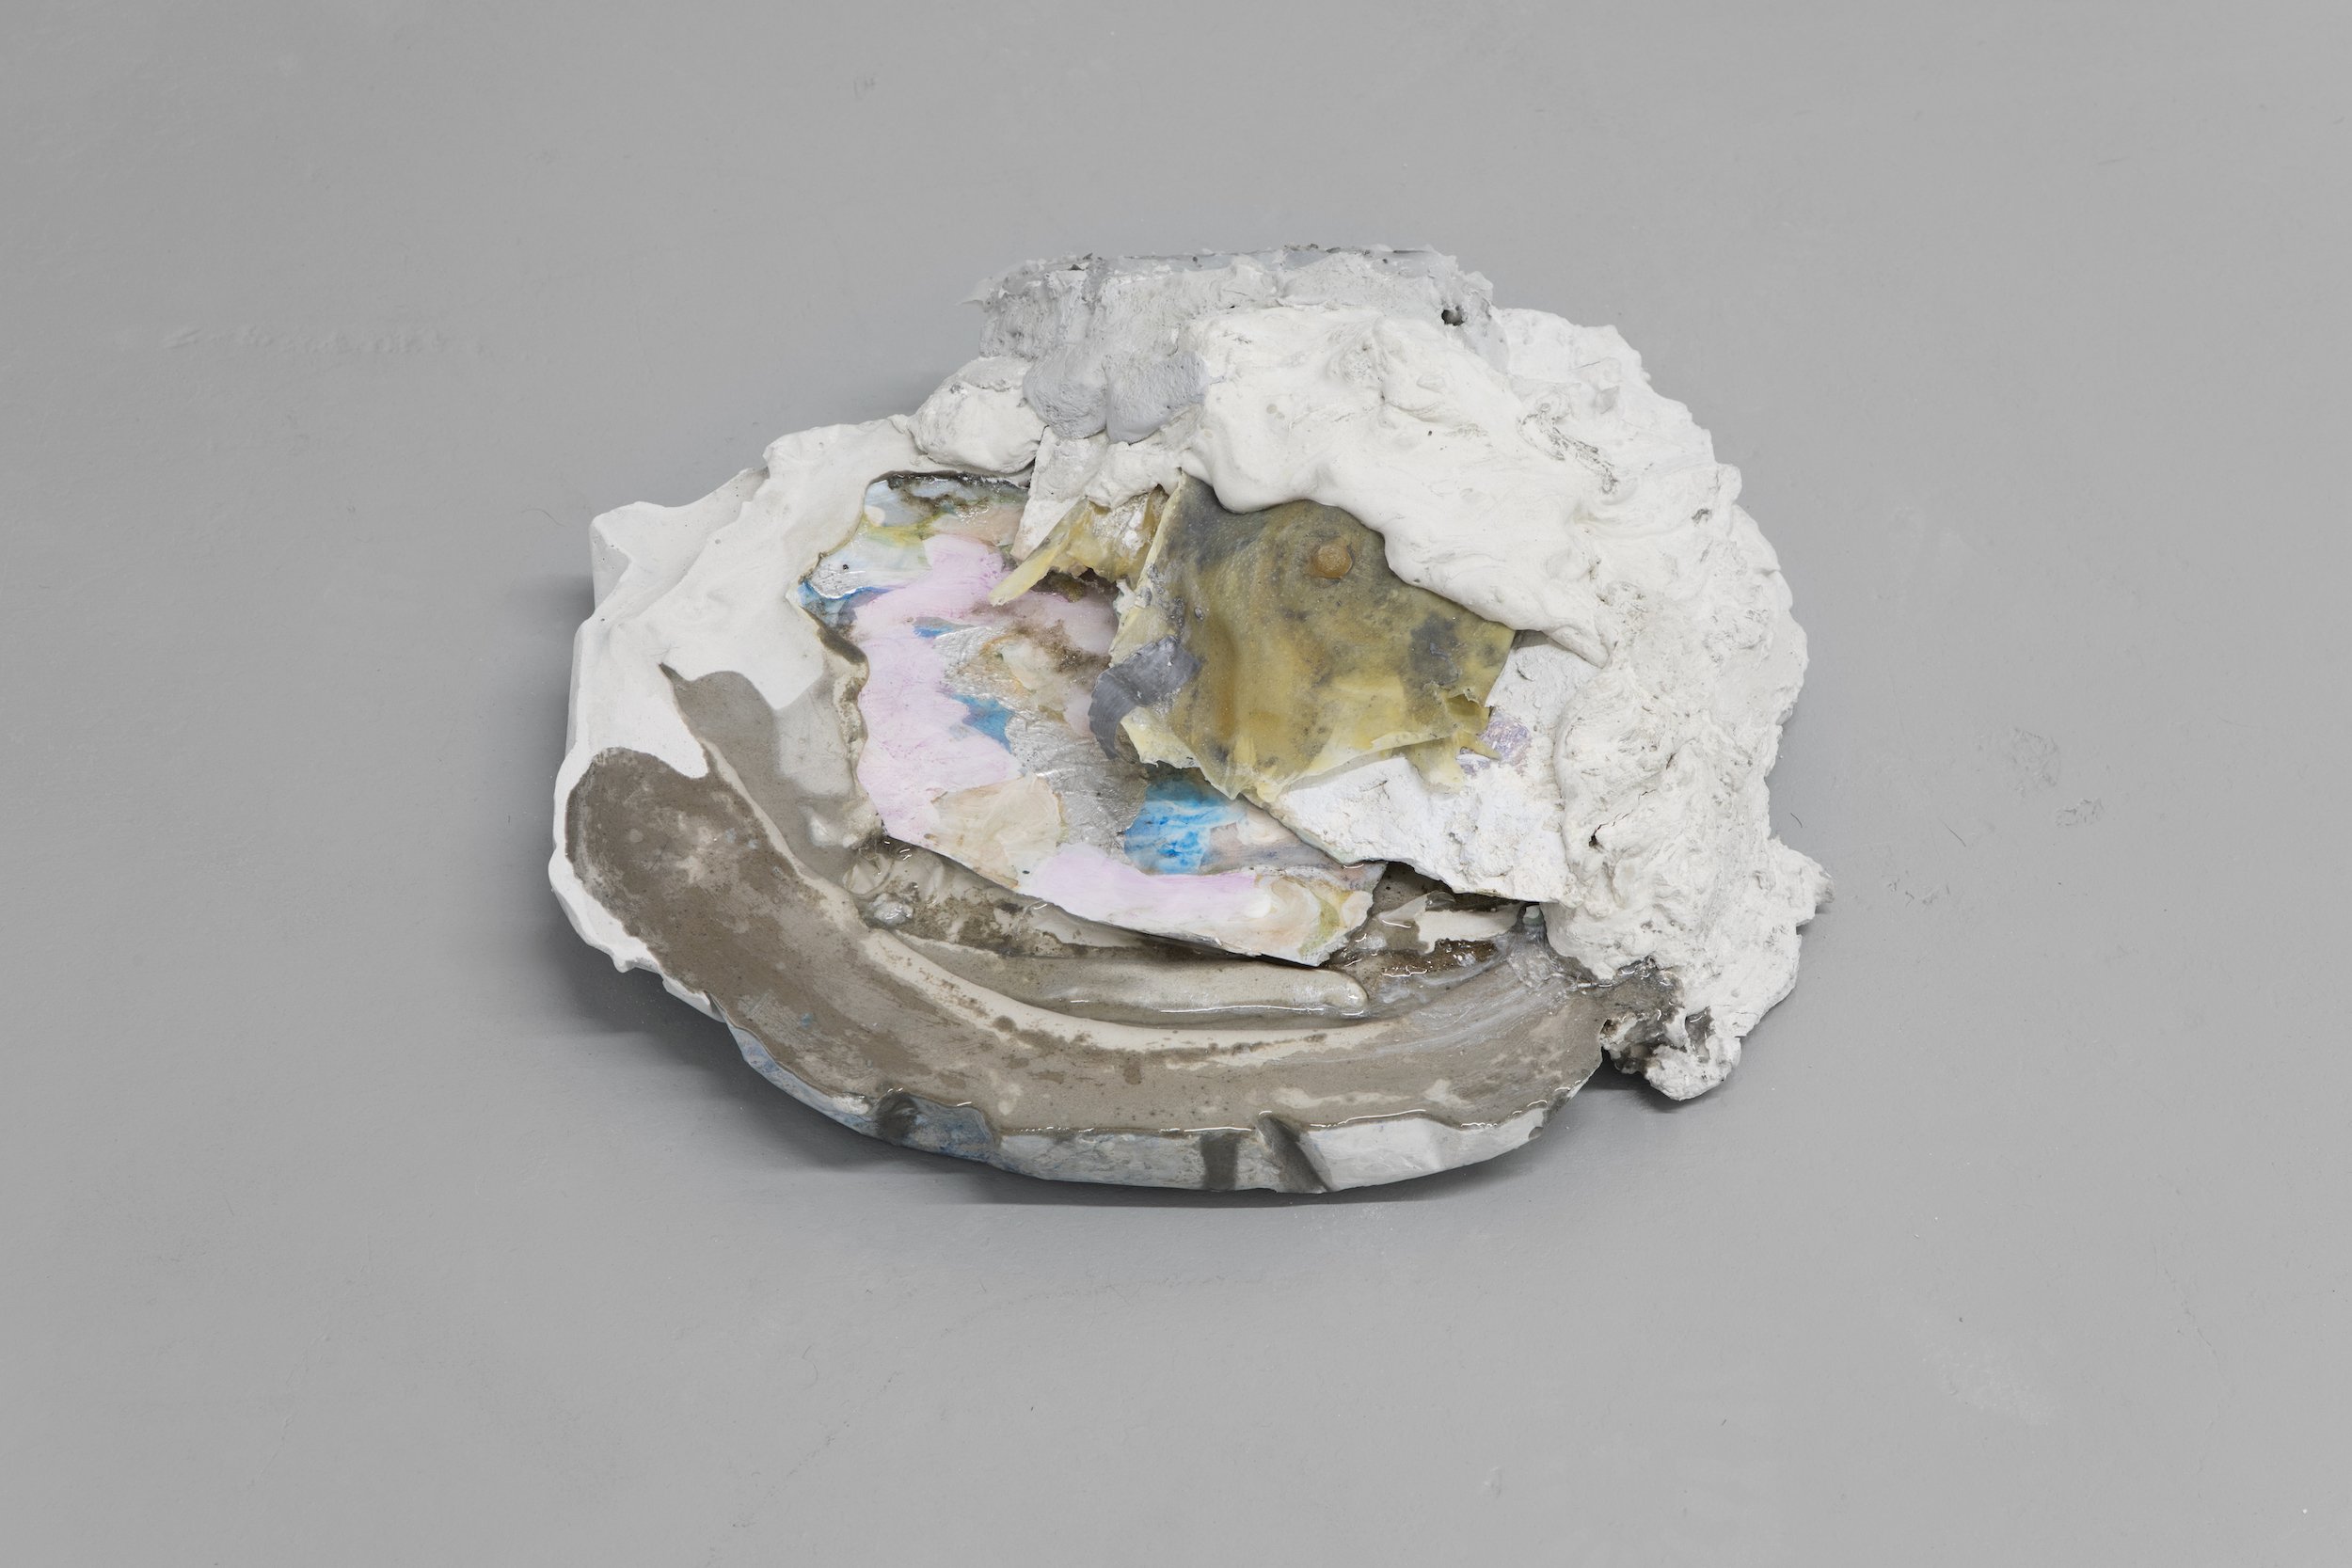  Laur P,  Offbeat ,  scratching at wordy membranes,  2024, Watercolour, acrylic and aluminum leaf on paper, plaster, epoxy resin, latex mold of abreast, silicone, metal chain puzzle, dry pigments, 39.4 x 33 x 12.7 cm  (15.5 x 13 x 5 ") 